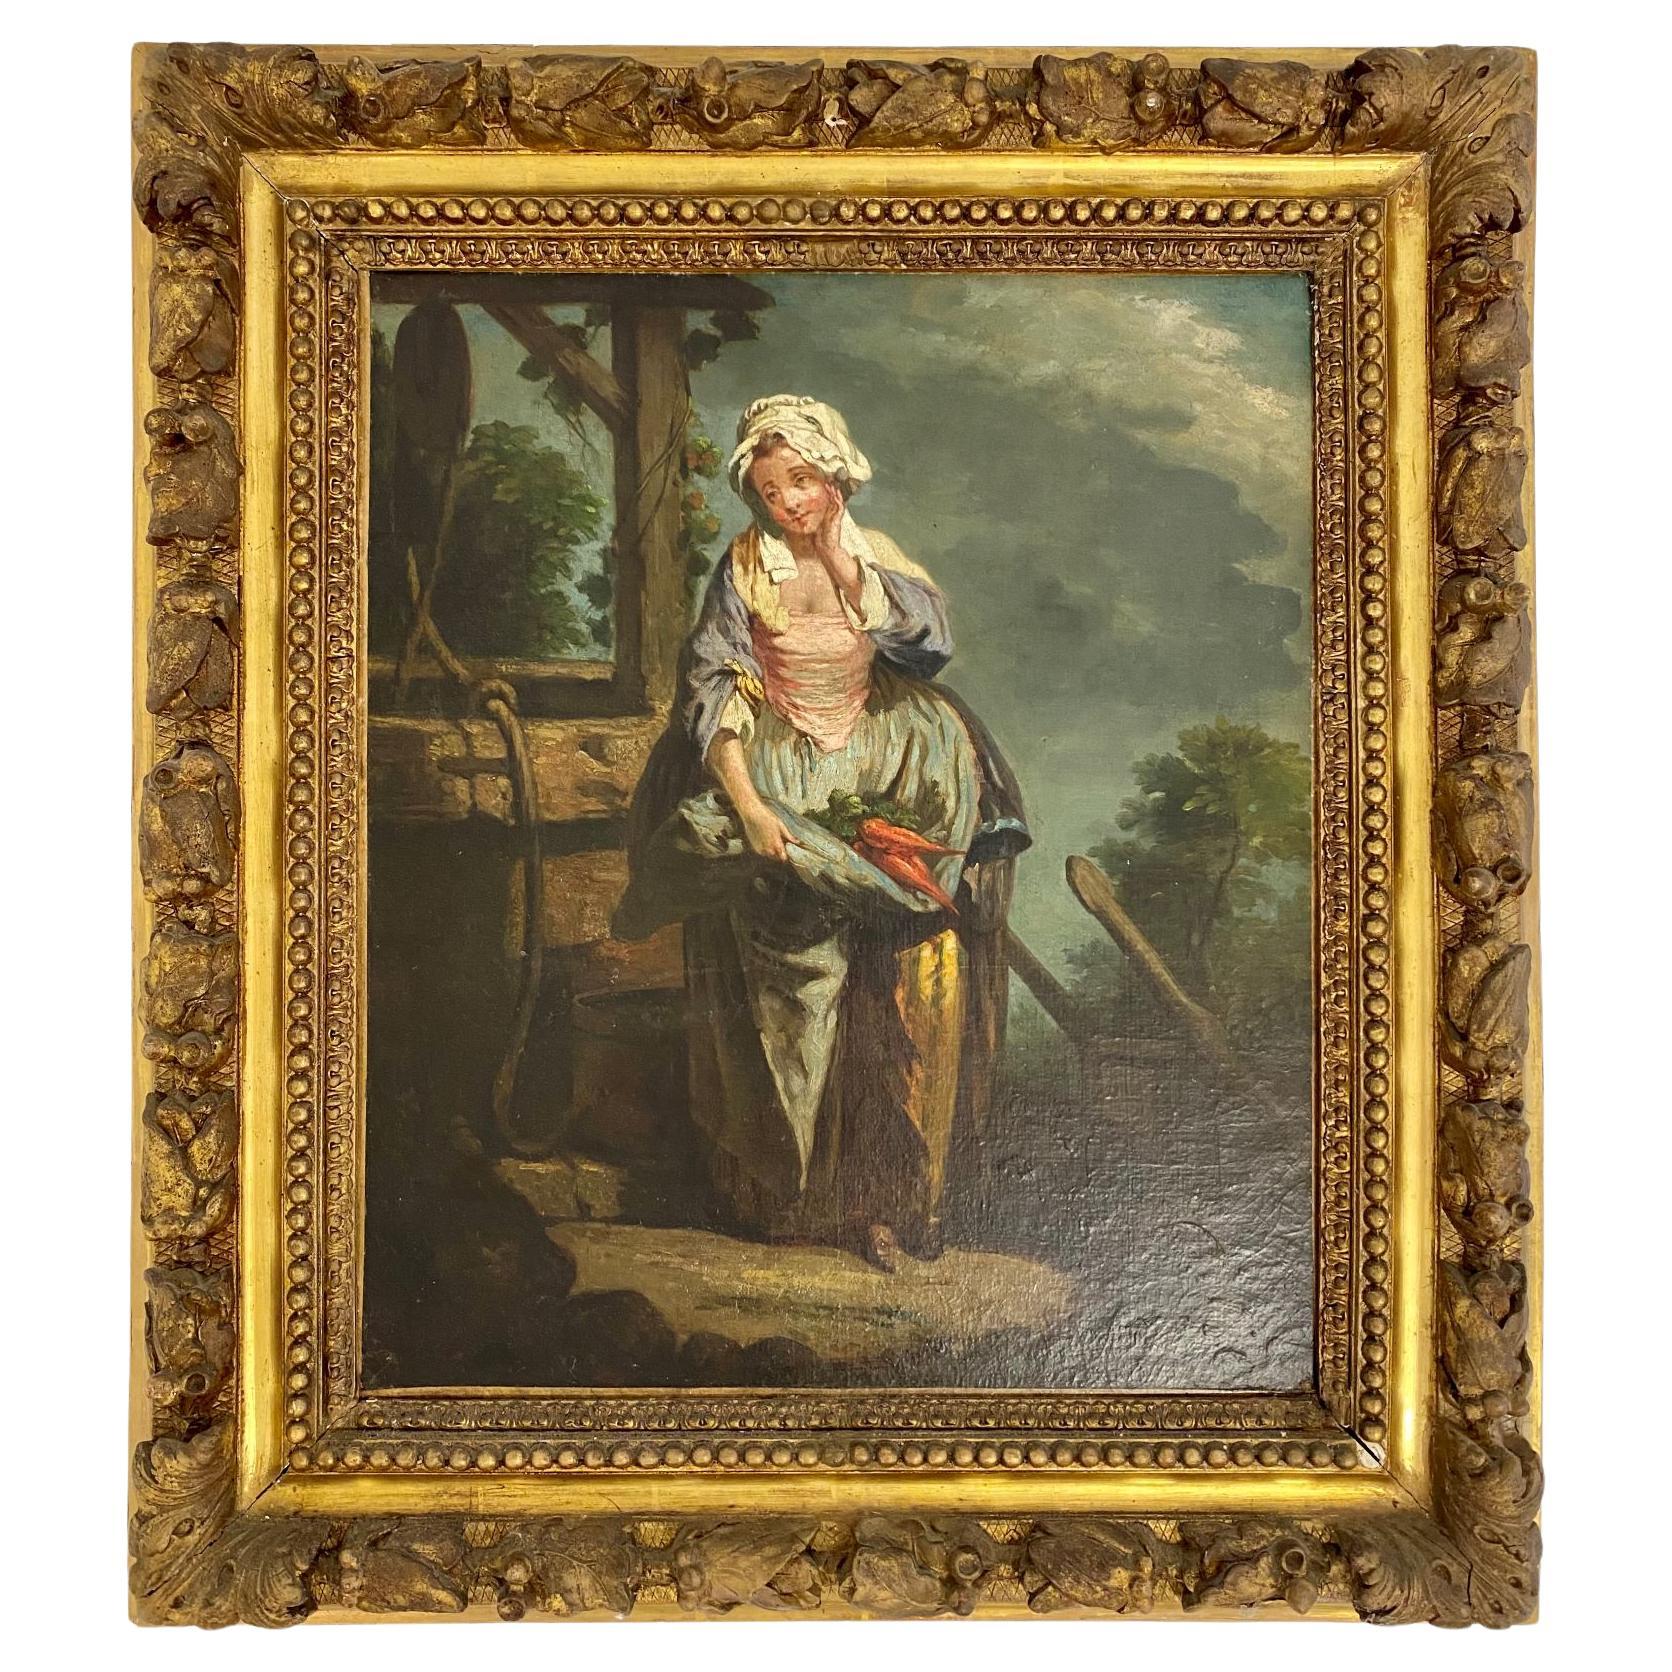 Framed Oil Painting in the 18th Century